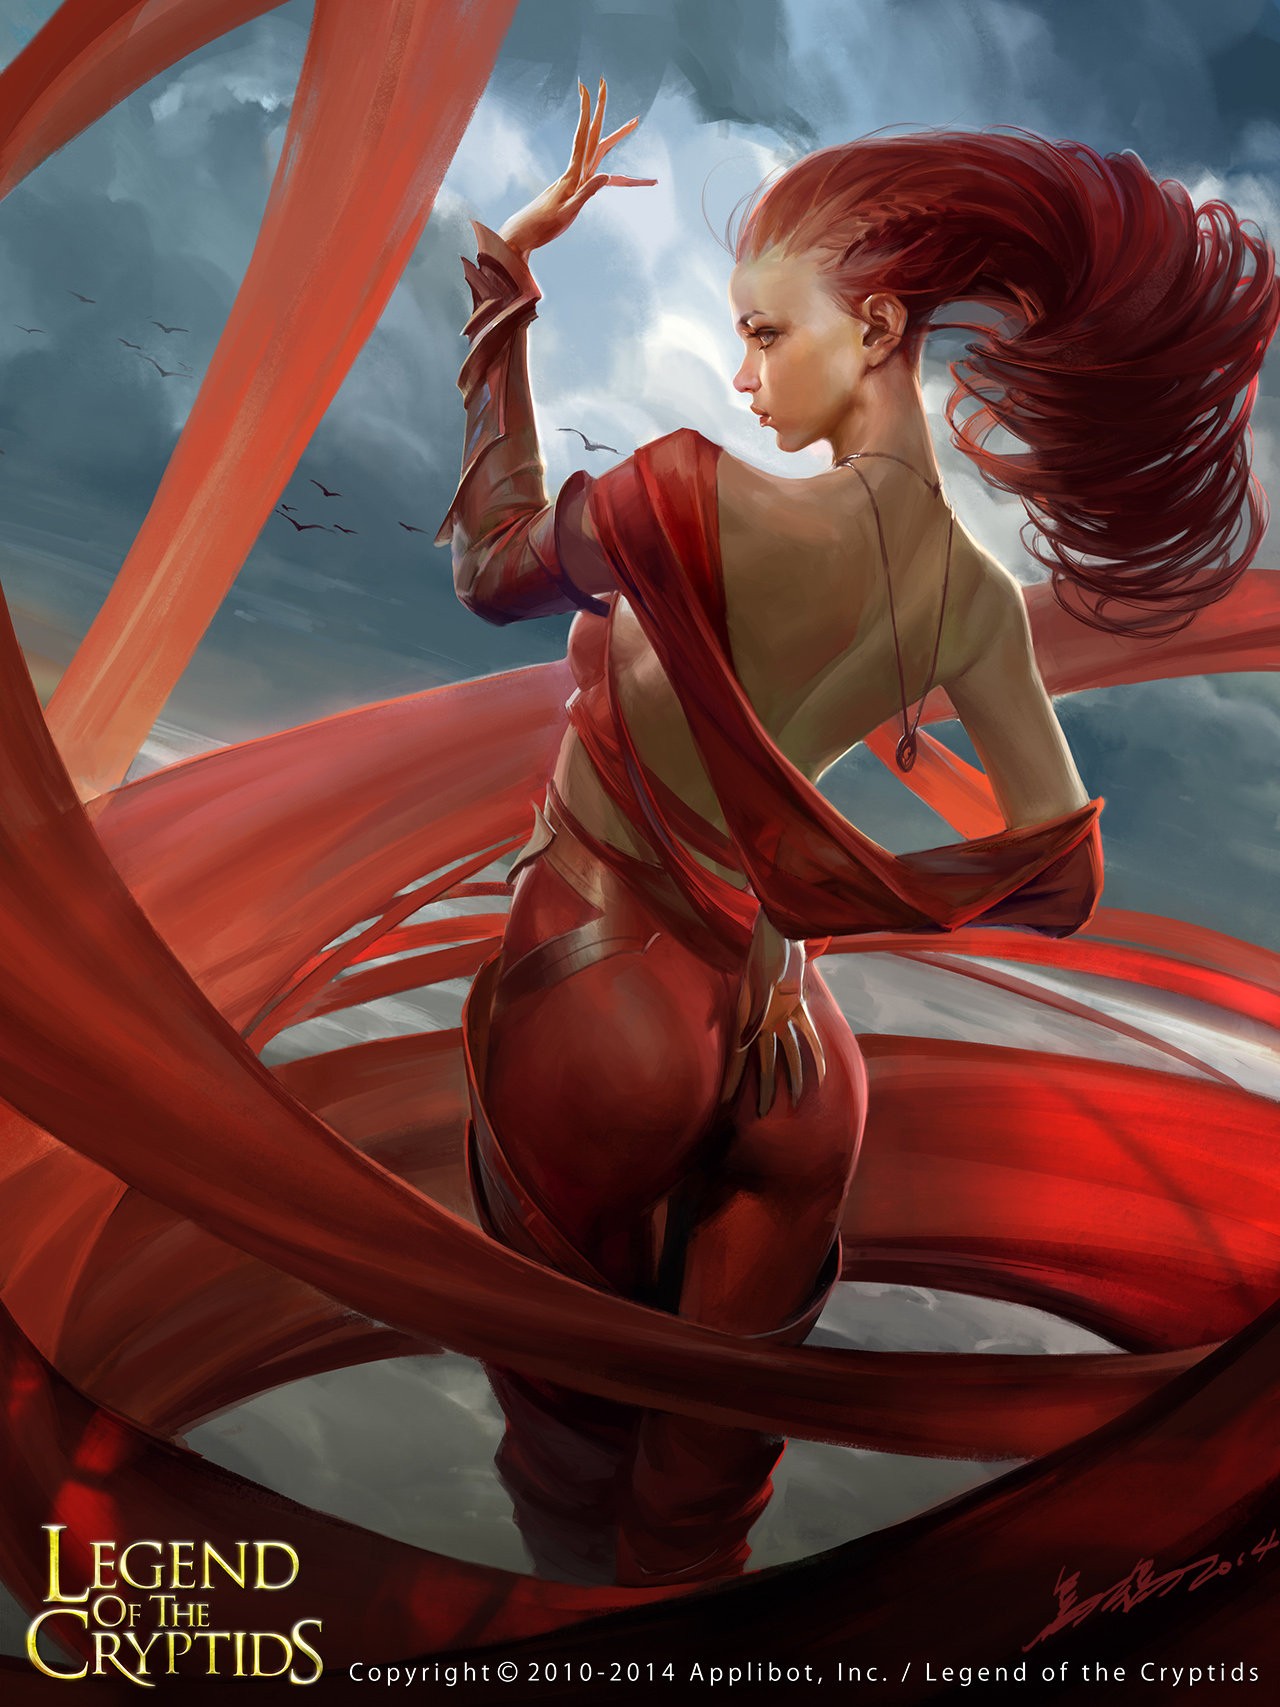 General 1280x1707 Legend of the Cryptids PC gaming ass redhead fantasy girl back rear view long hair women fantasy art